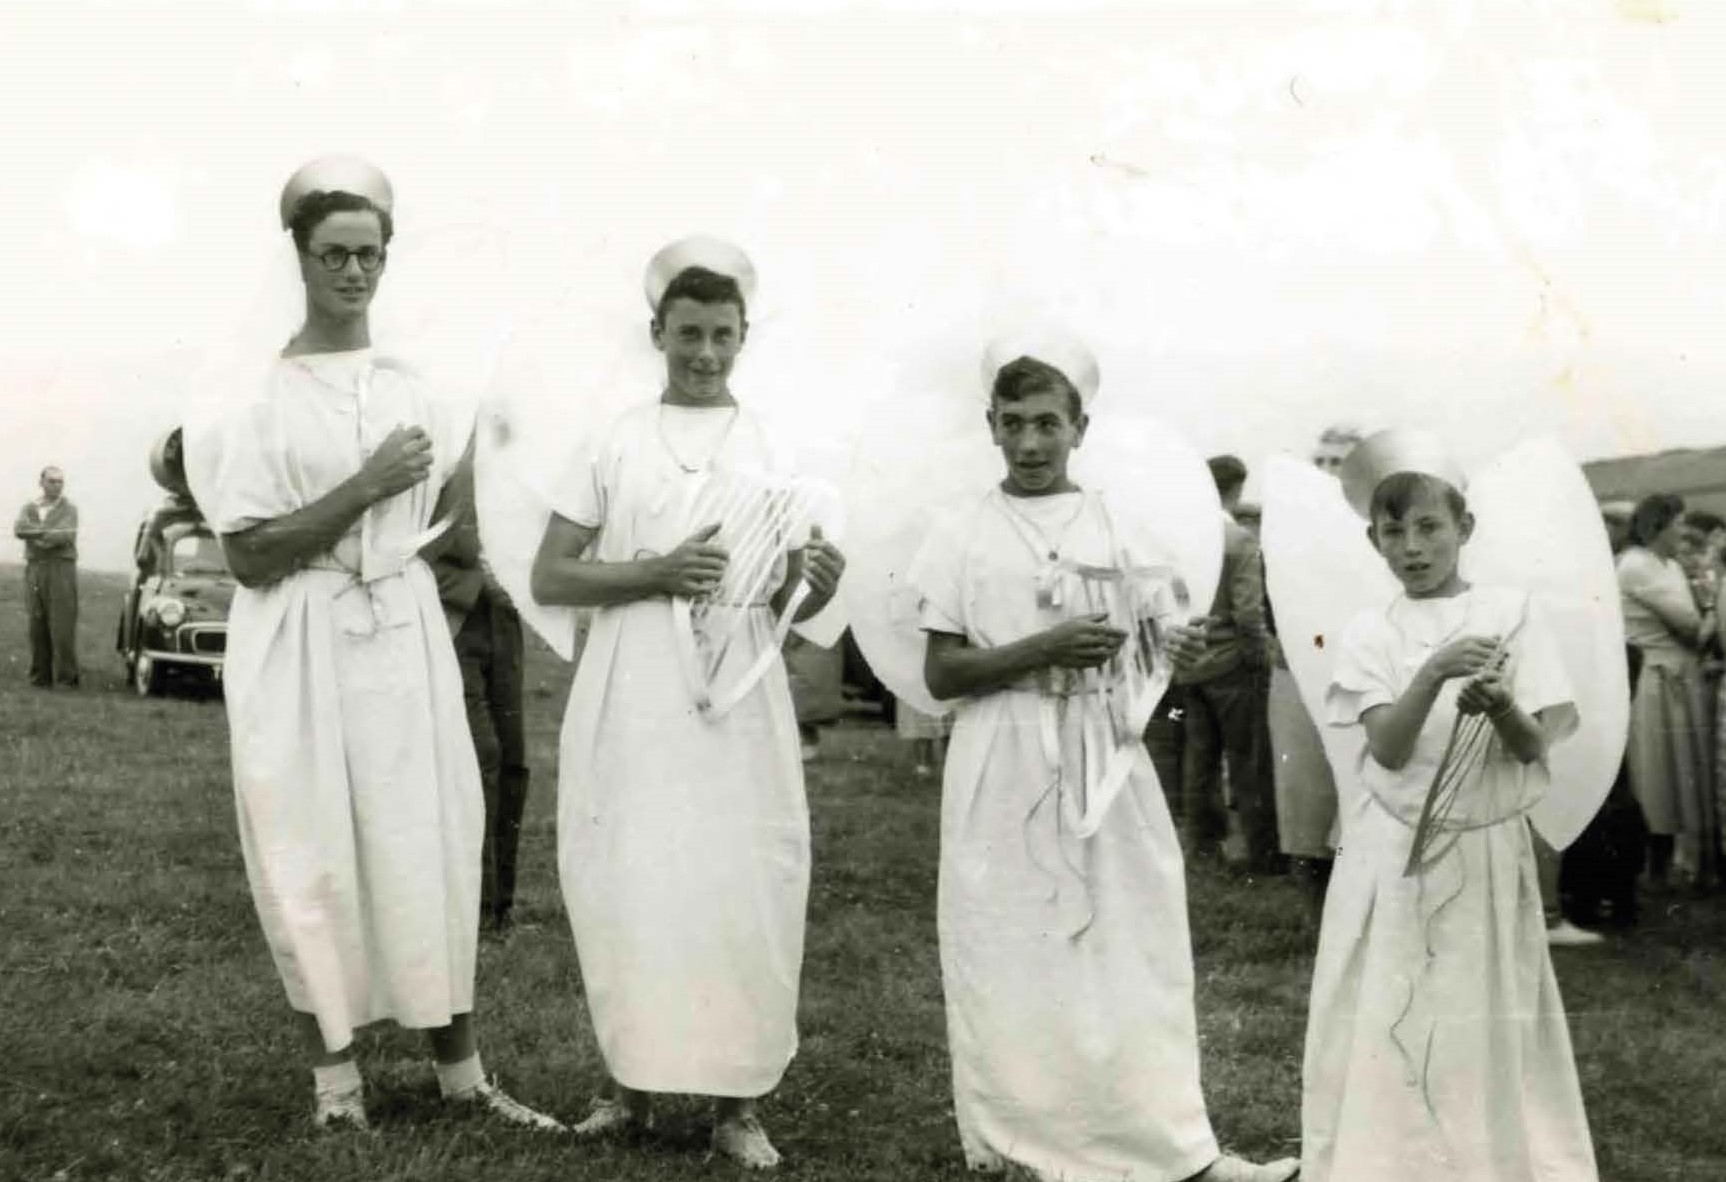 1955 Port Isaac Carnival - The Angelic Band